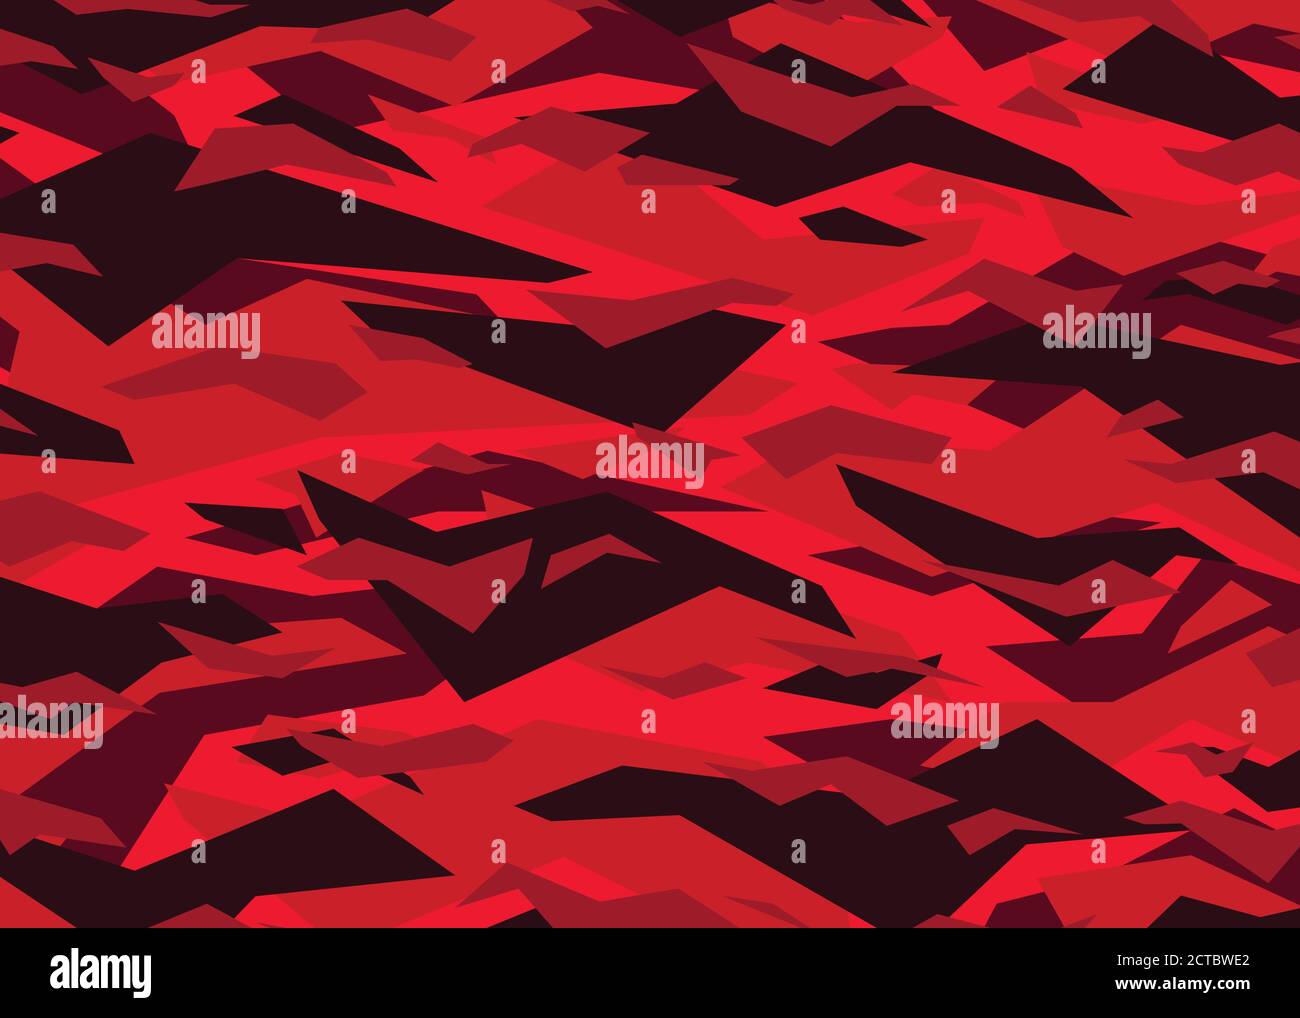 Red modern camouflage pattern. vector background illustration for web, background, surface design. Stock Vector